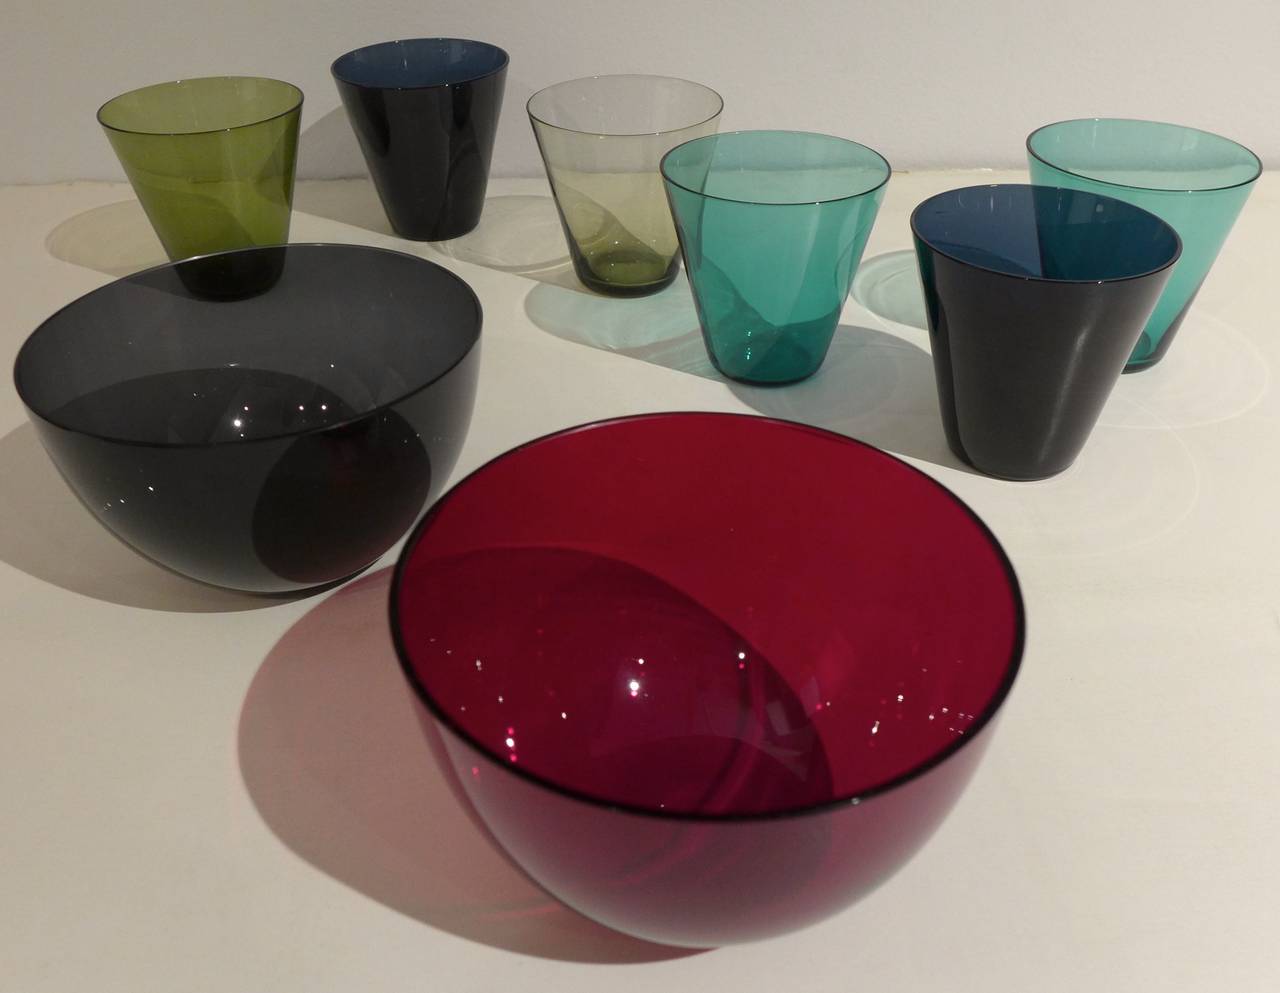 Set of blown glass vessels from the 2744 series, designed by Kaj Franck and produced by Nuutajarvi Nottsjo, Finland, from 1955-67.  Comprising six glasses and two bowls in deep blue, green, red, pale blue, and smoked glass.  Widely acclaimed in its